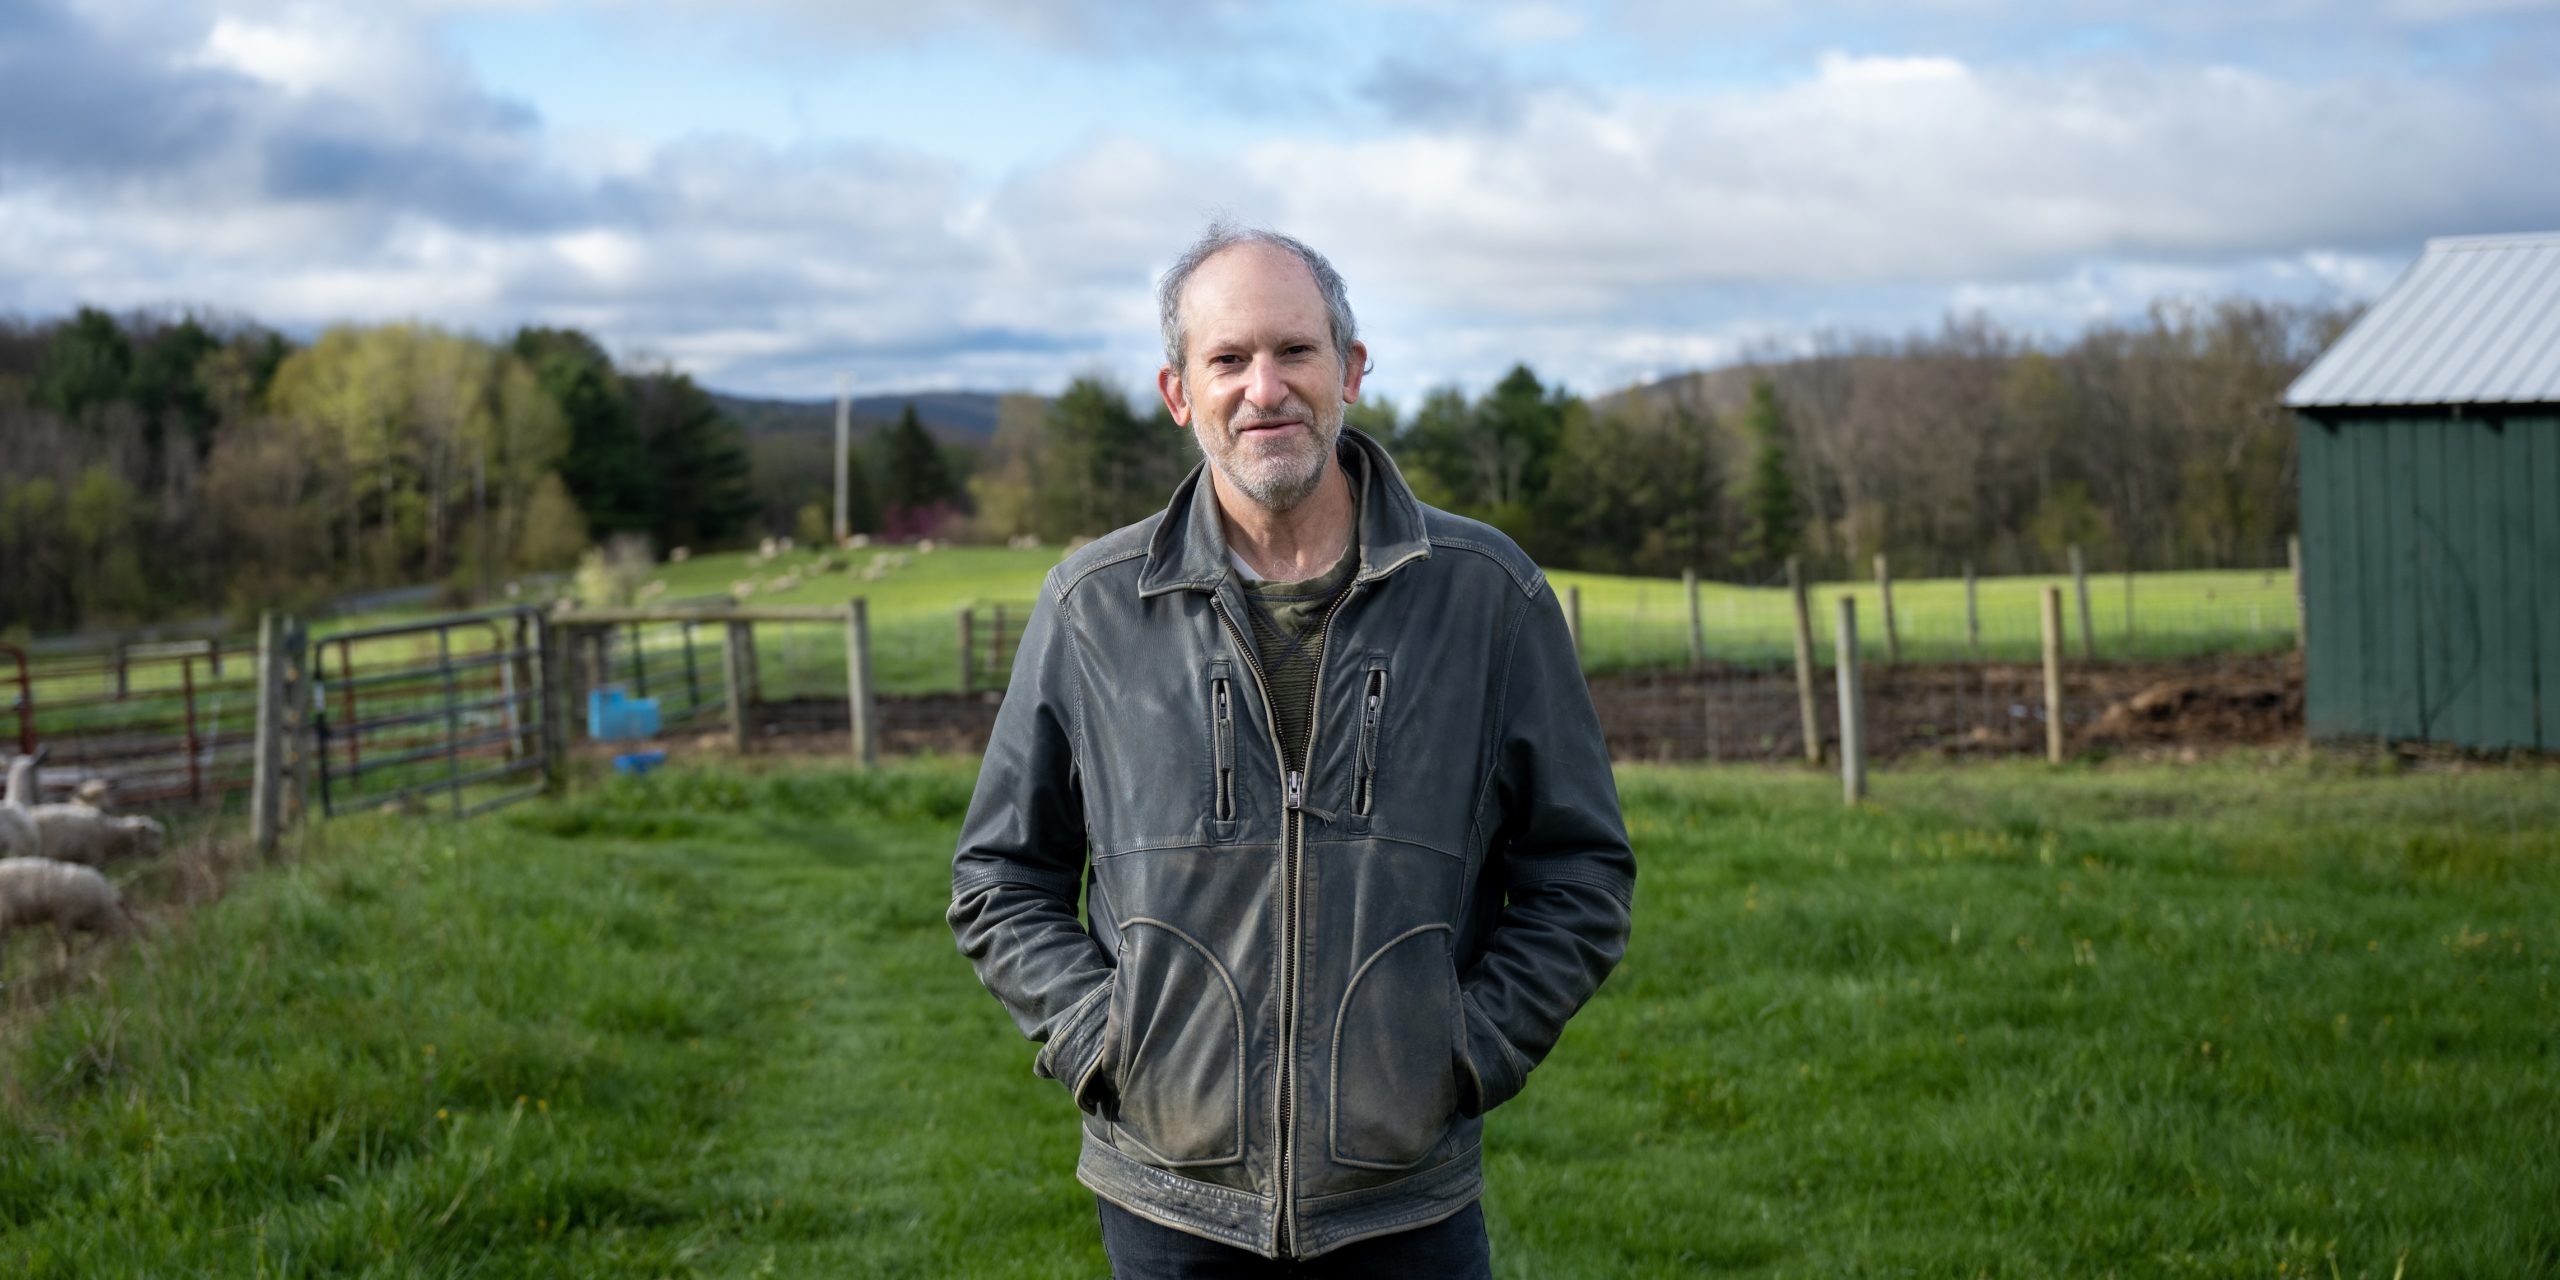 A medium shot of David Sten standing in a field on his farm. He is smiling and wearing a black leather jacket that is slightly worn. The grass is green, and there are fences in the background. On the left side of the picture, a handful of little sheep play. On the right side is a green barn with a metal roof. In the far distance are more sheep, then trees, and then hills and a cloudy sky.